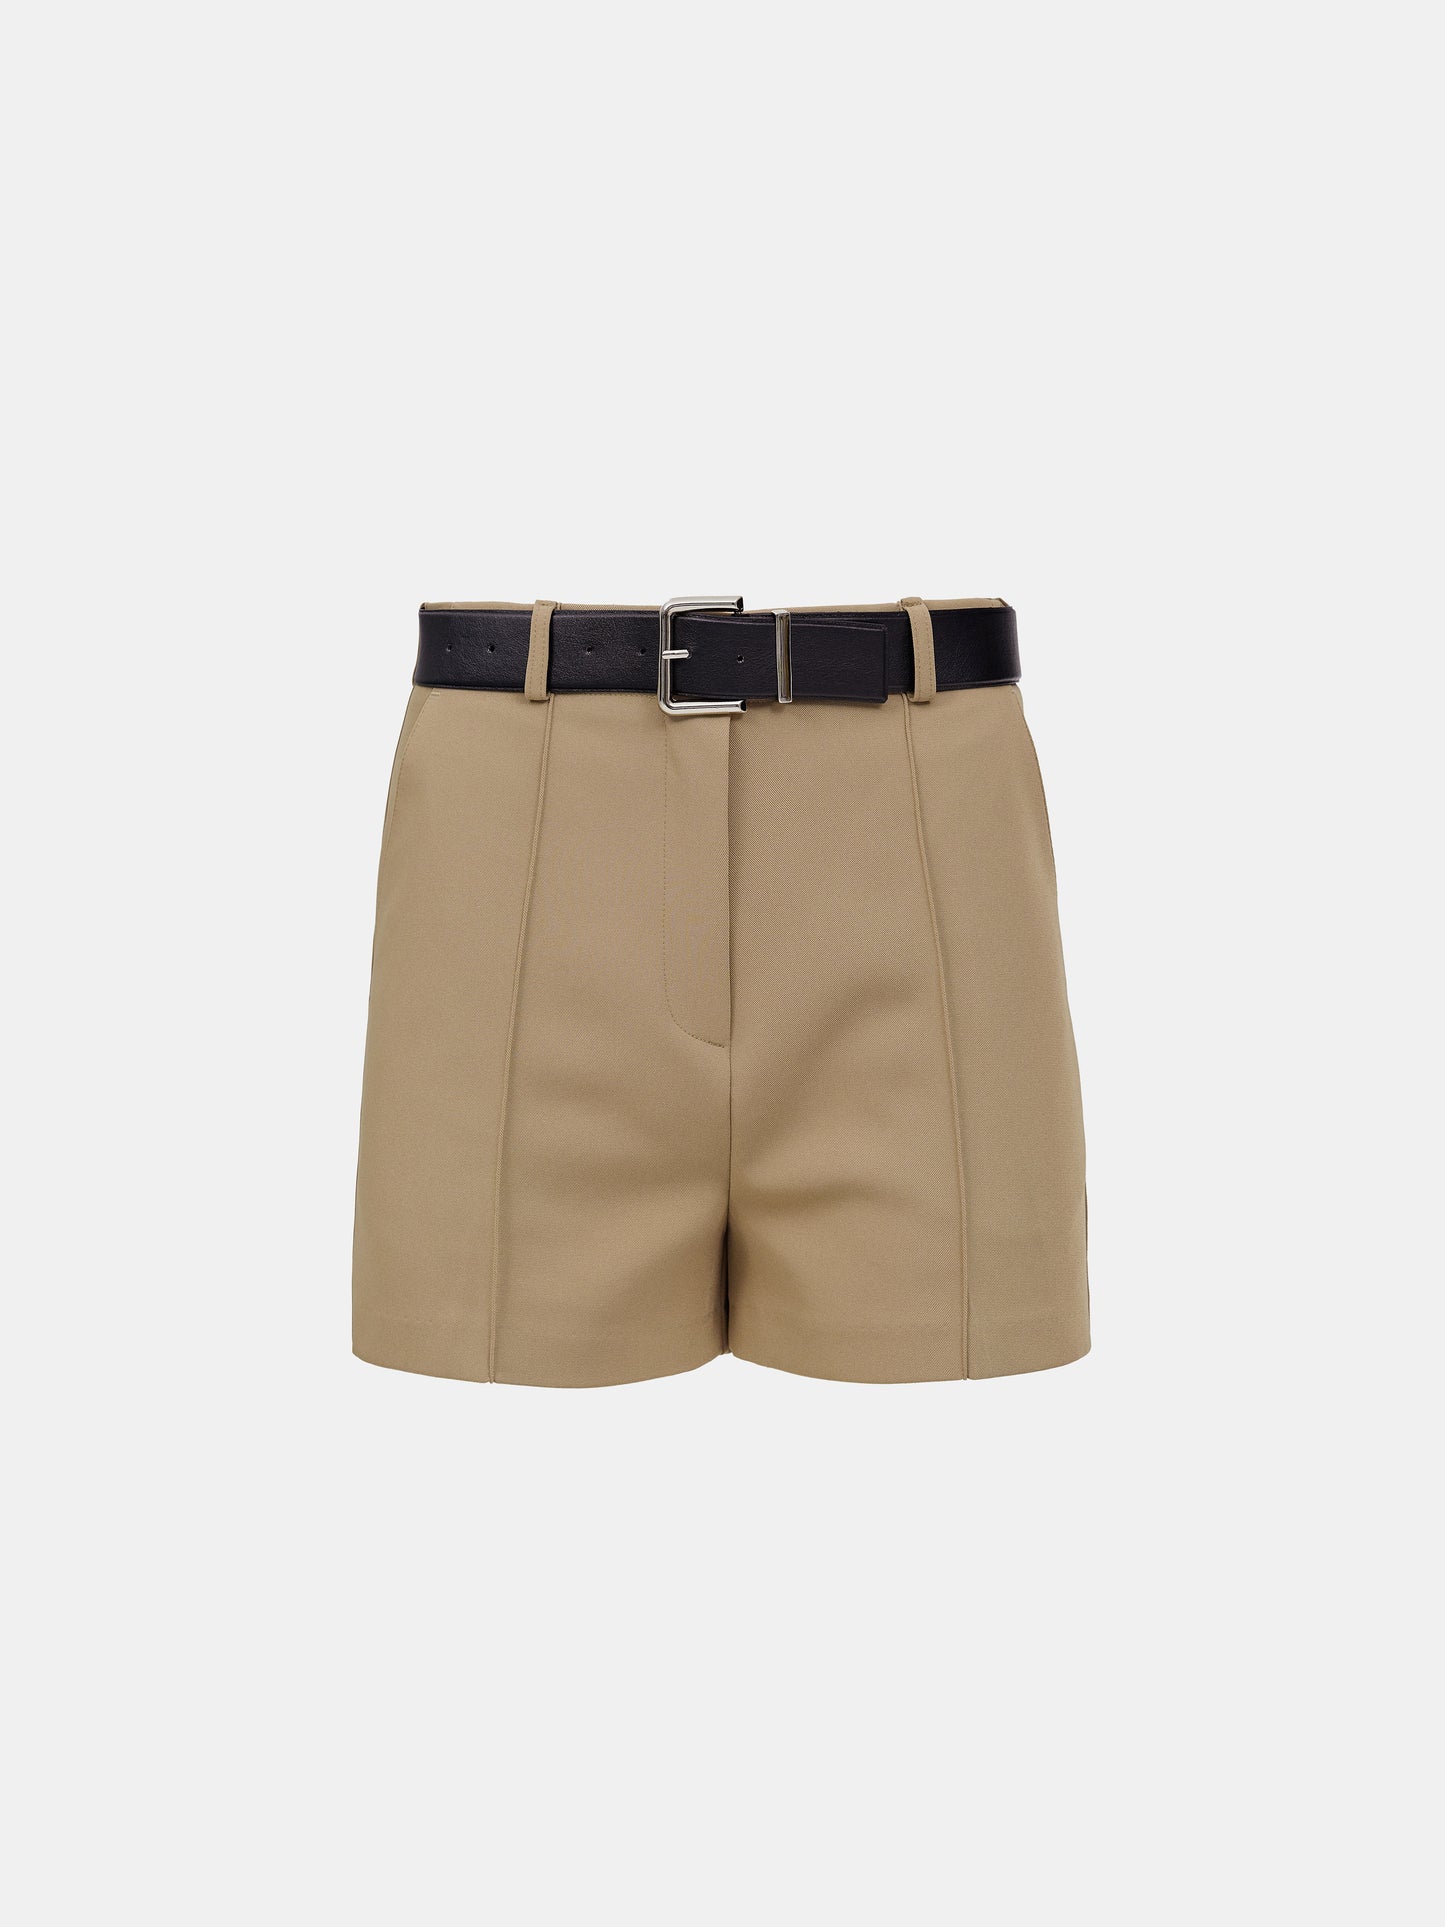 Belted Suit Shorts, Tan